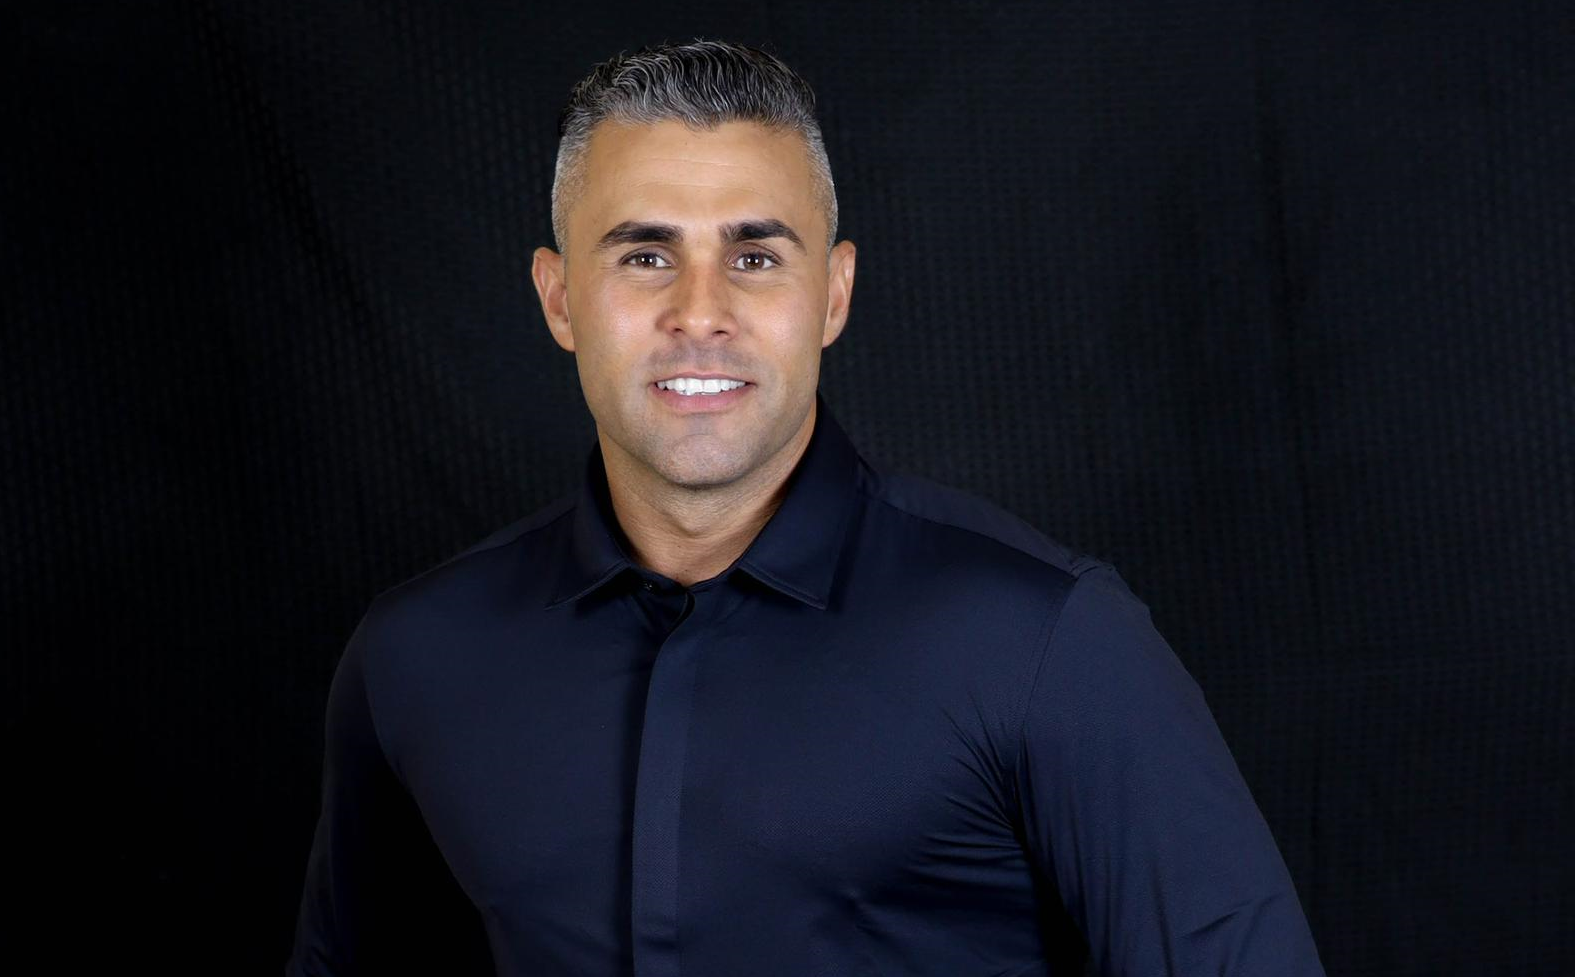 Meet Manuel Molinos: The Expert Realtor Based in Ocala, Florida Who is Optimistic About the Industry in 2023